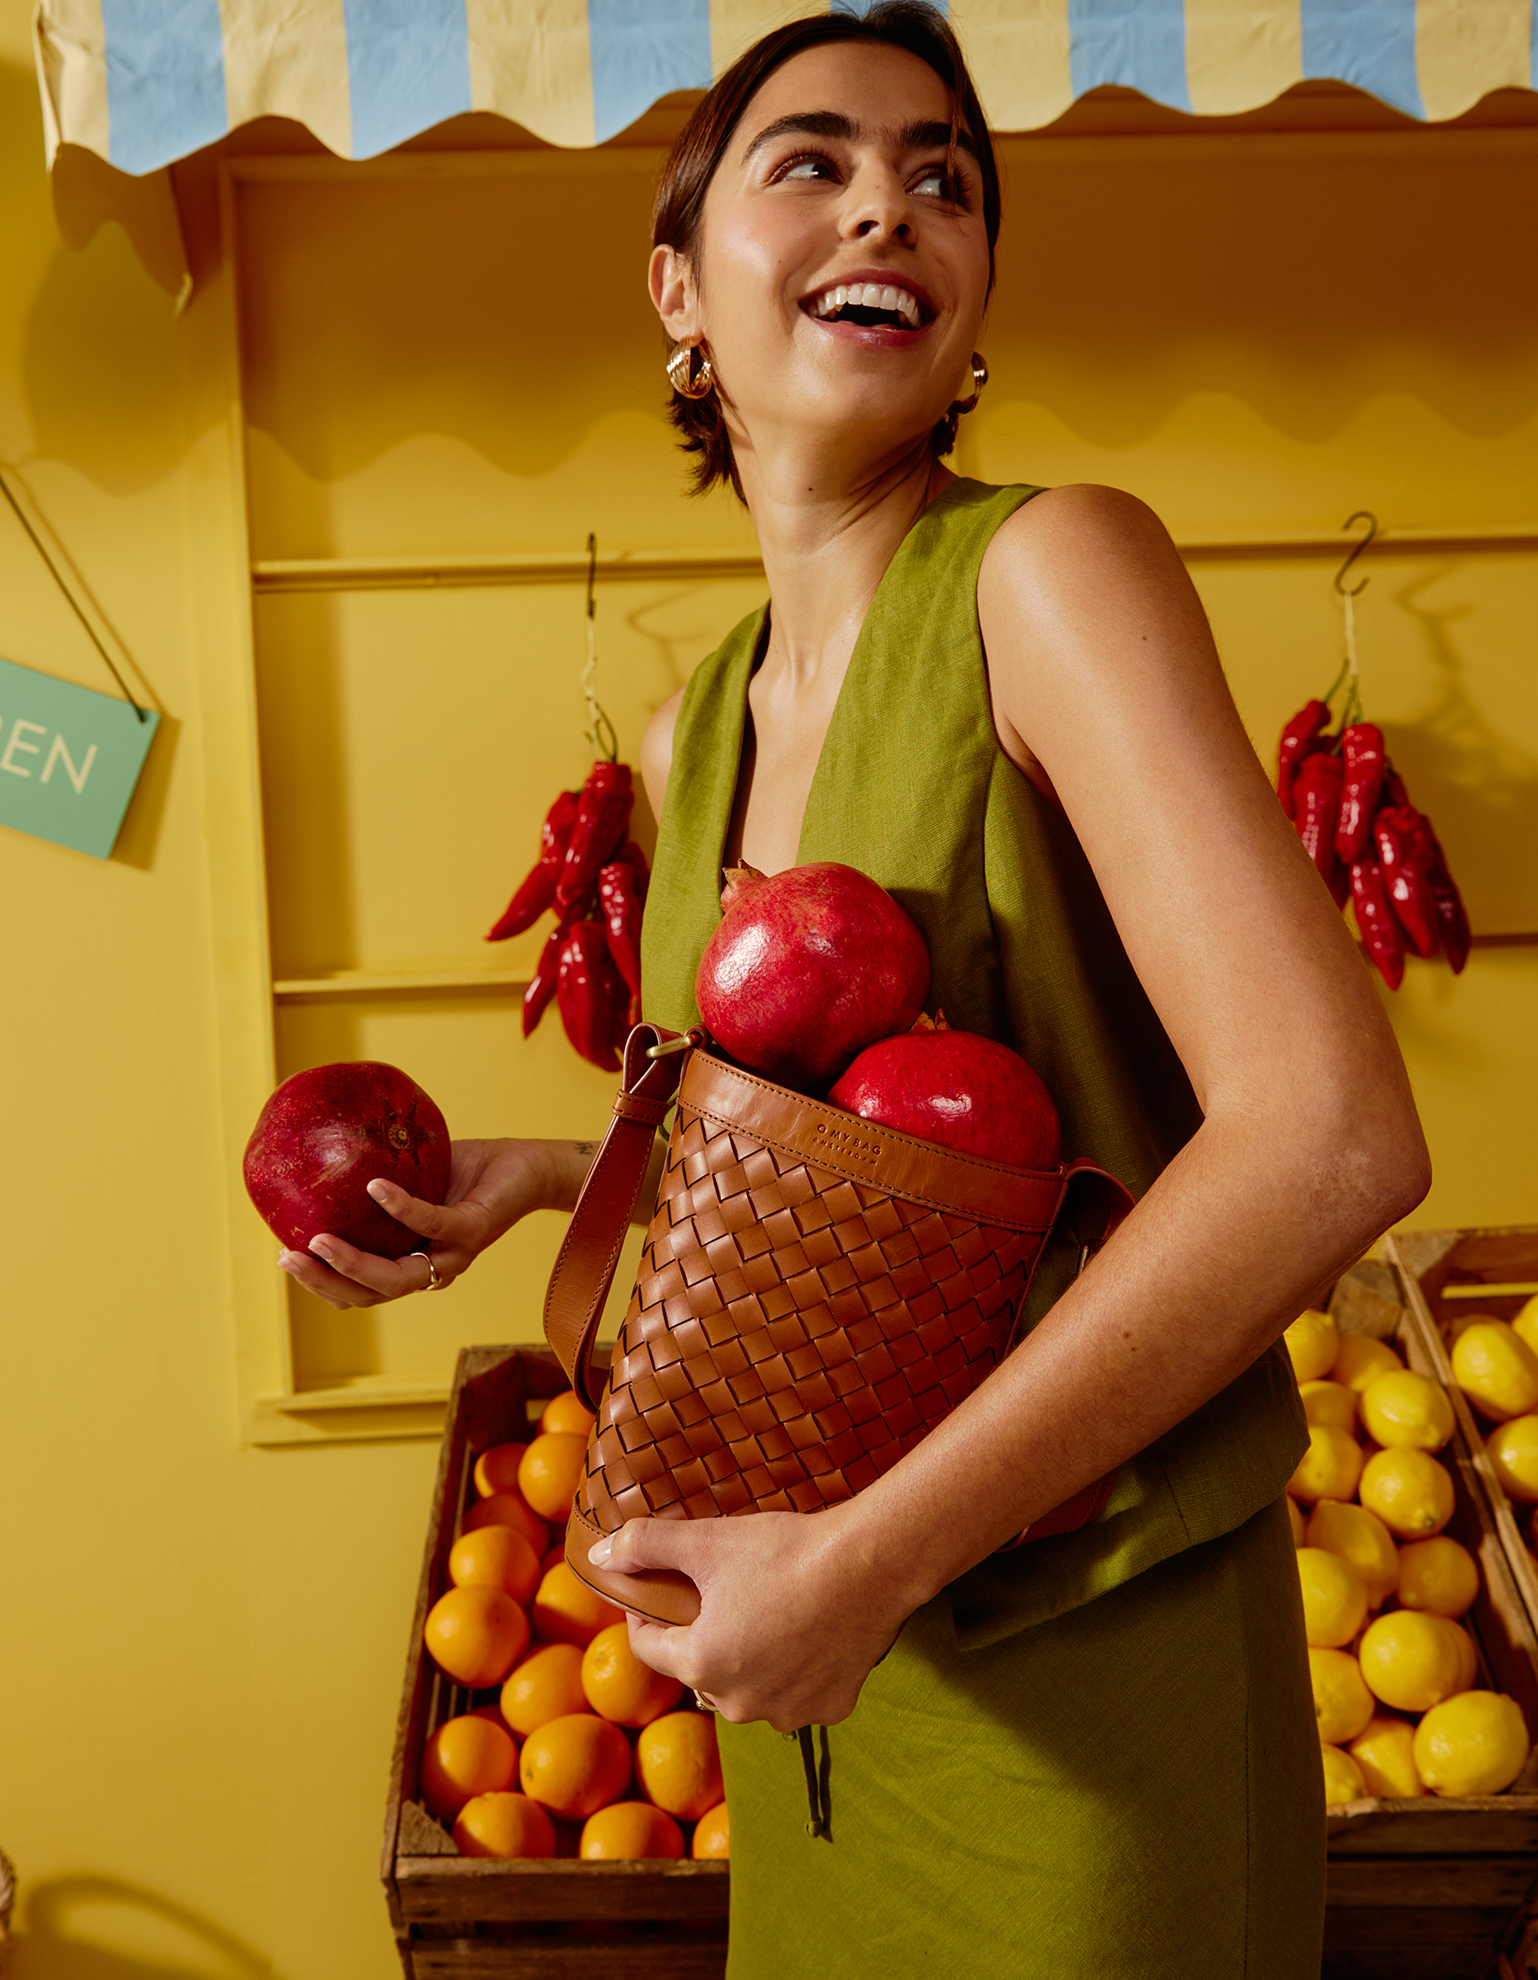 Campaign image of zola bag and fresh fruit